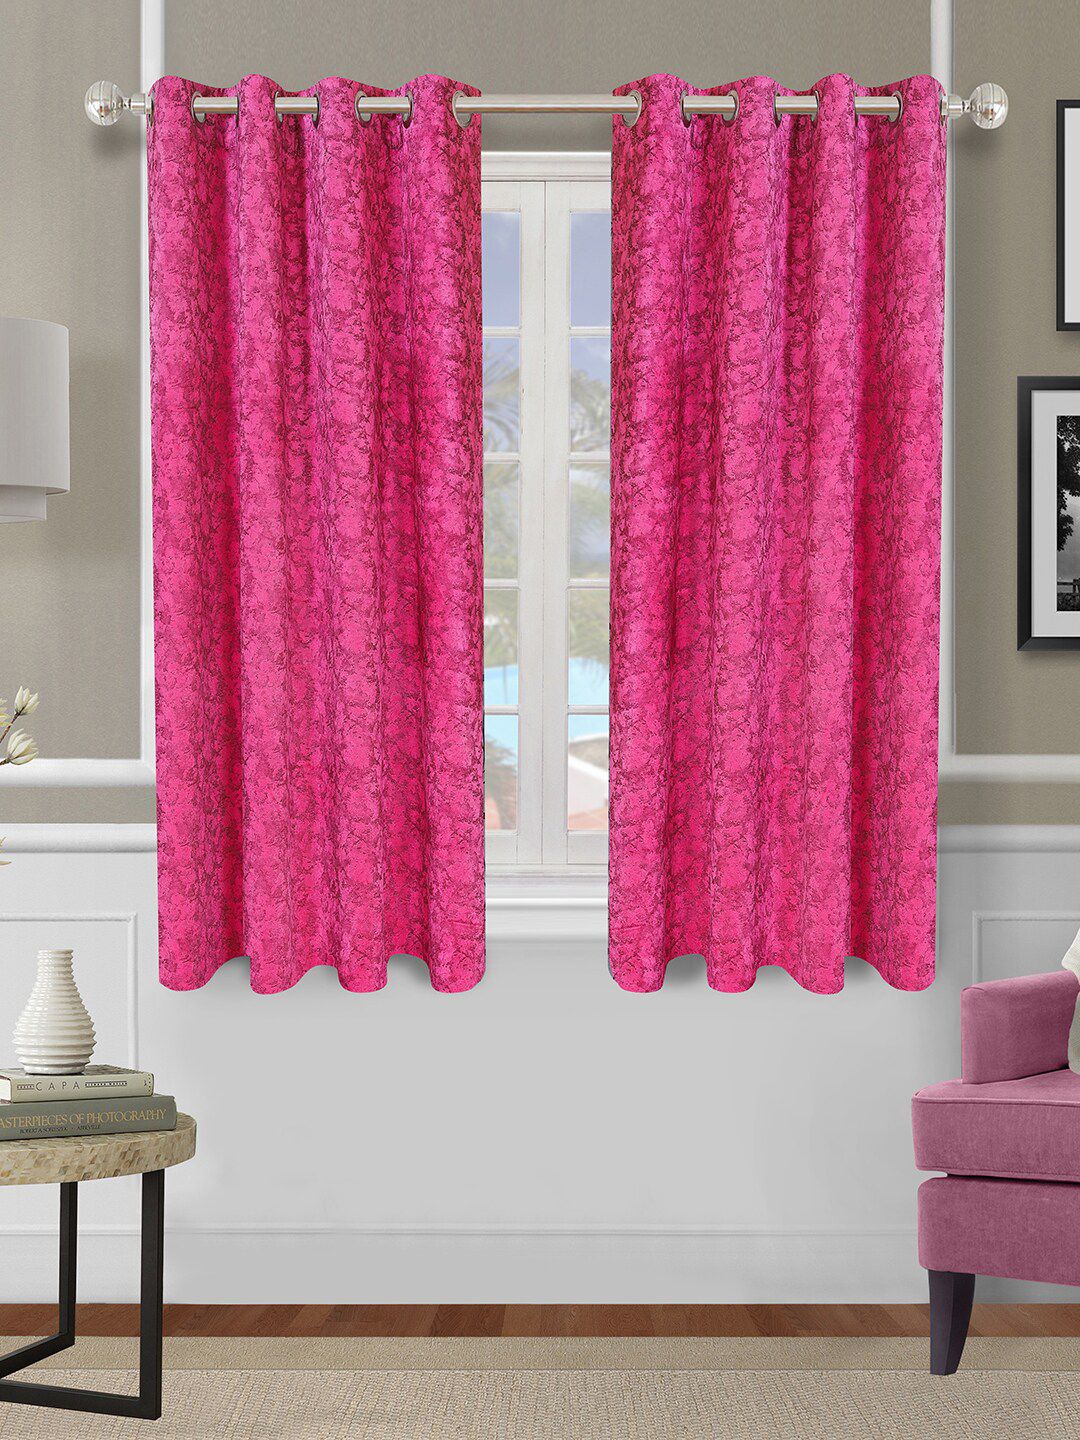 ROMEE Set Of 2 Pink Abstract Printed Window Curtains Price in India